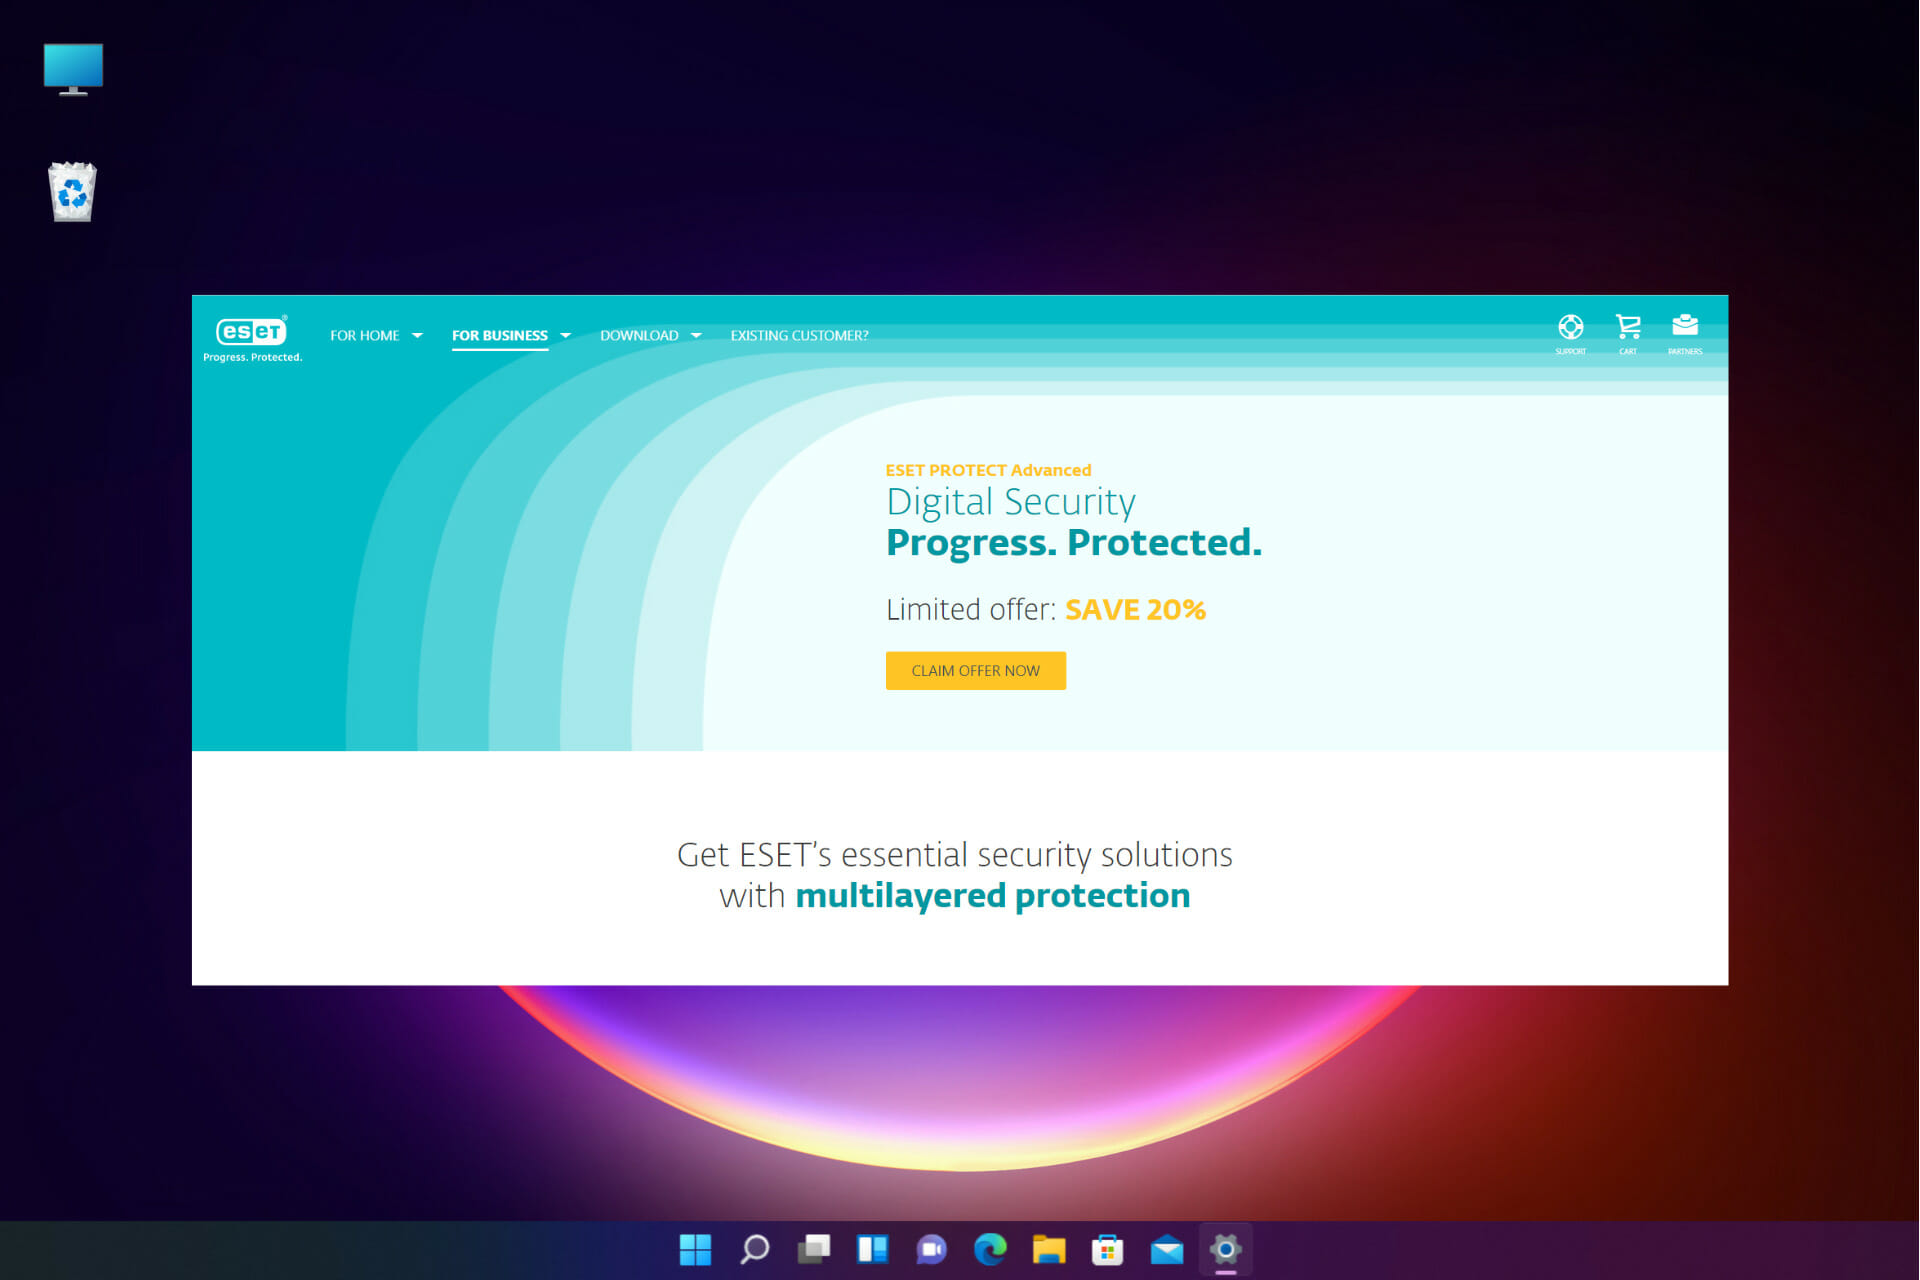 Eset PROTECT Advanced offer